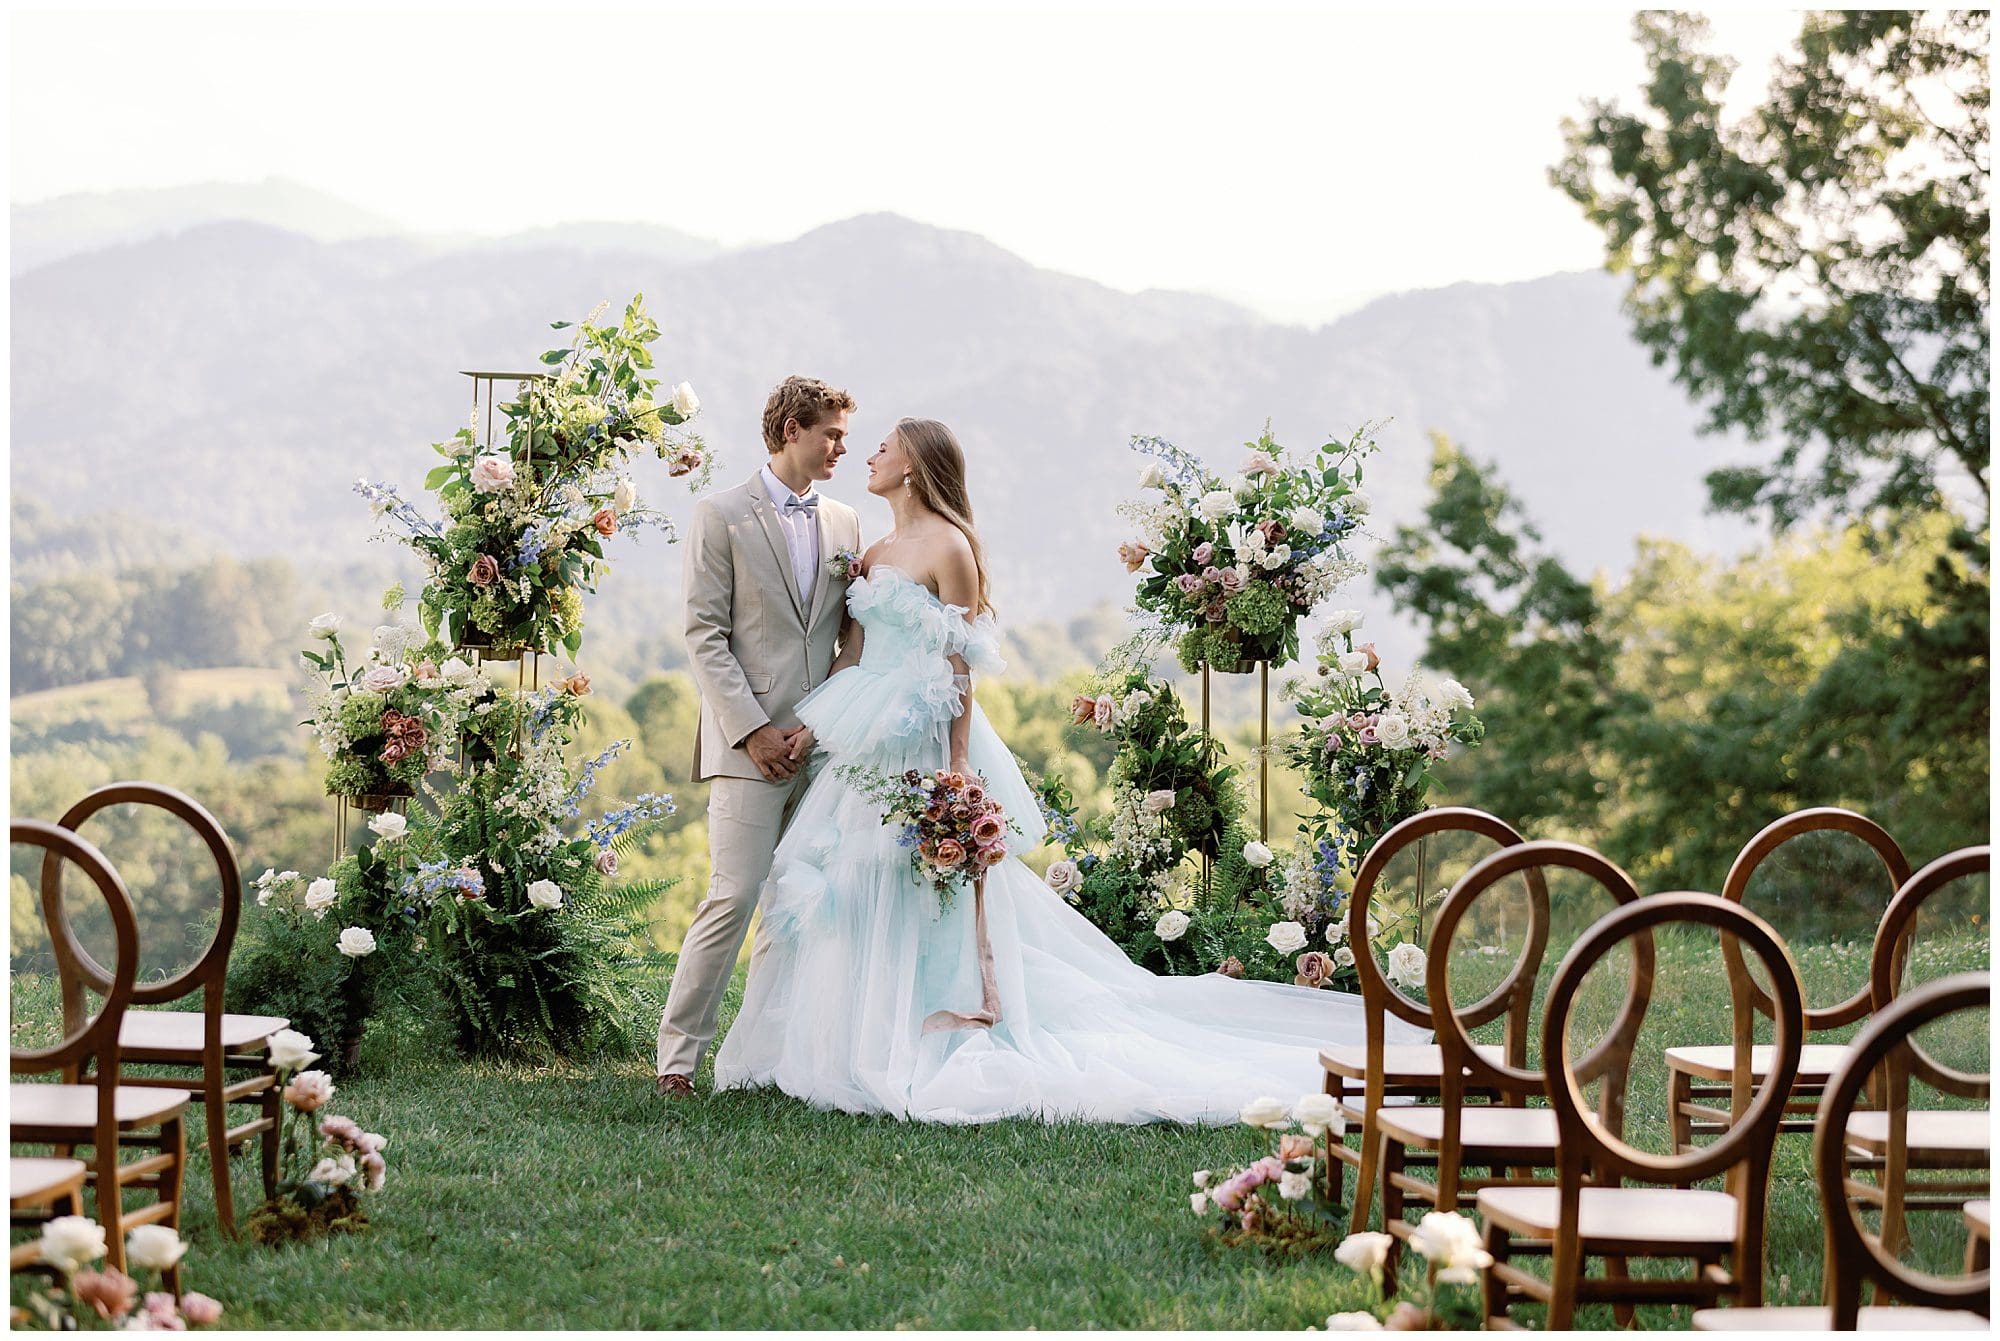 A Parisian-inspired summer wedding at The Ridge with mountains in the background.